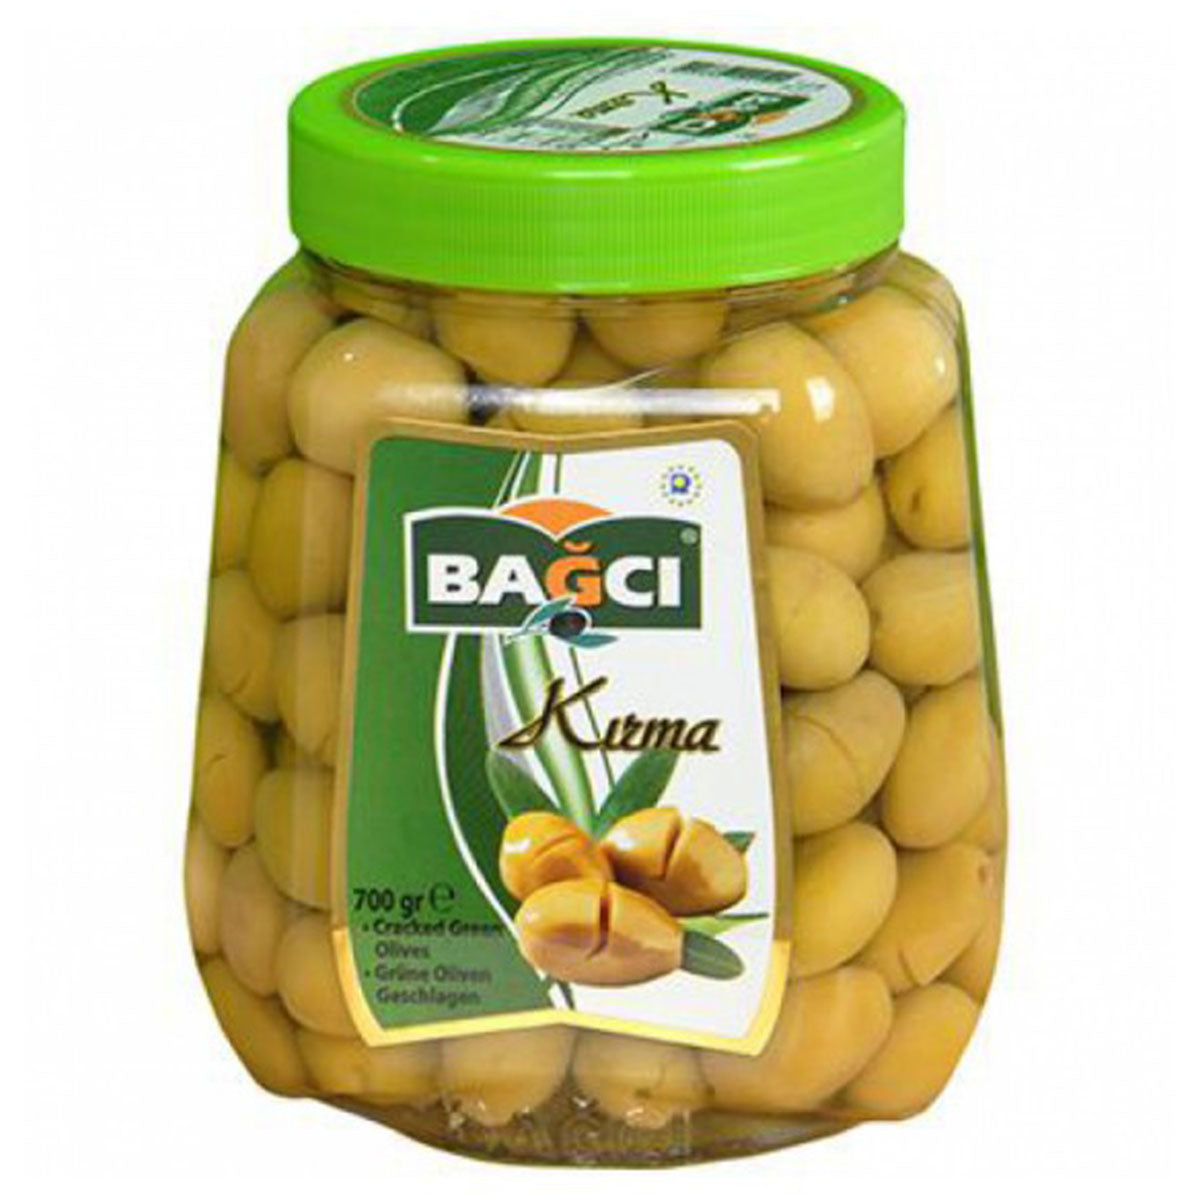 Bagci - Cracked Green Olives - 700g - Continental Food Store